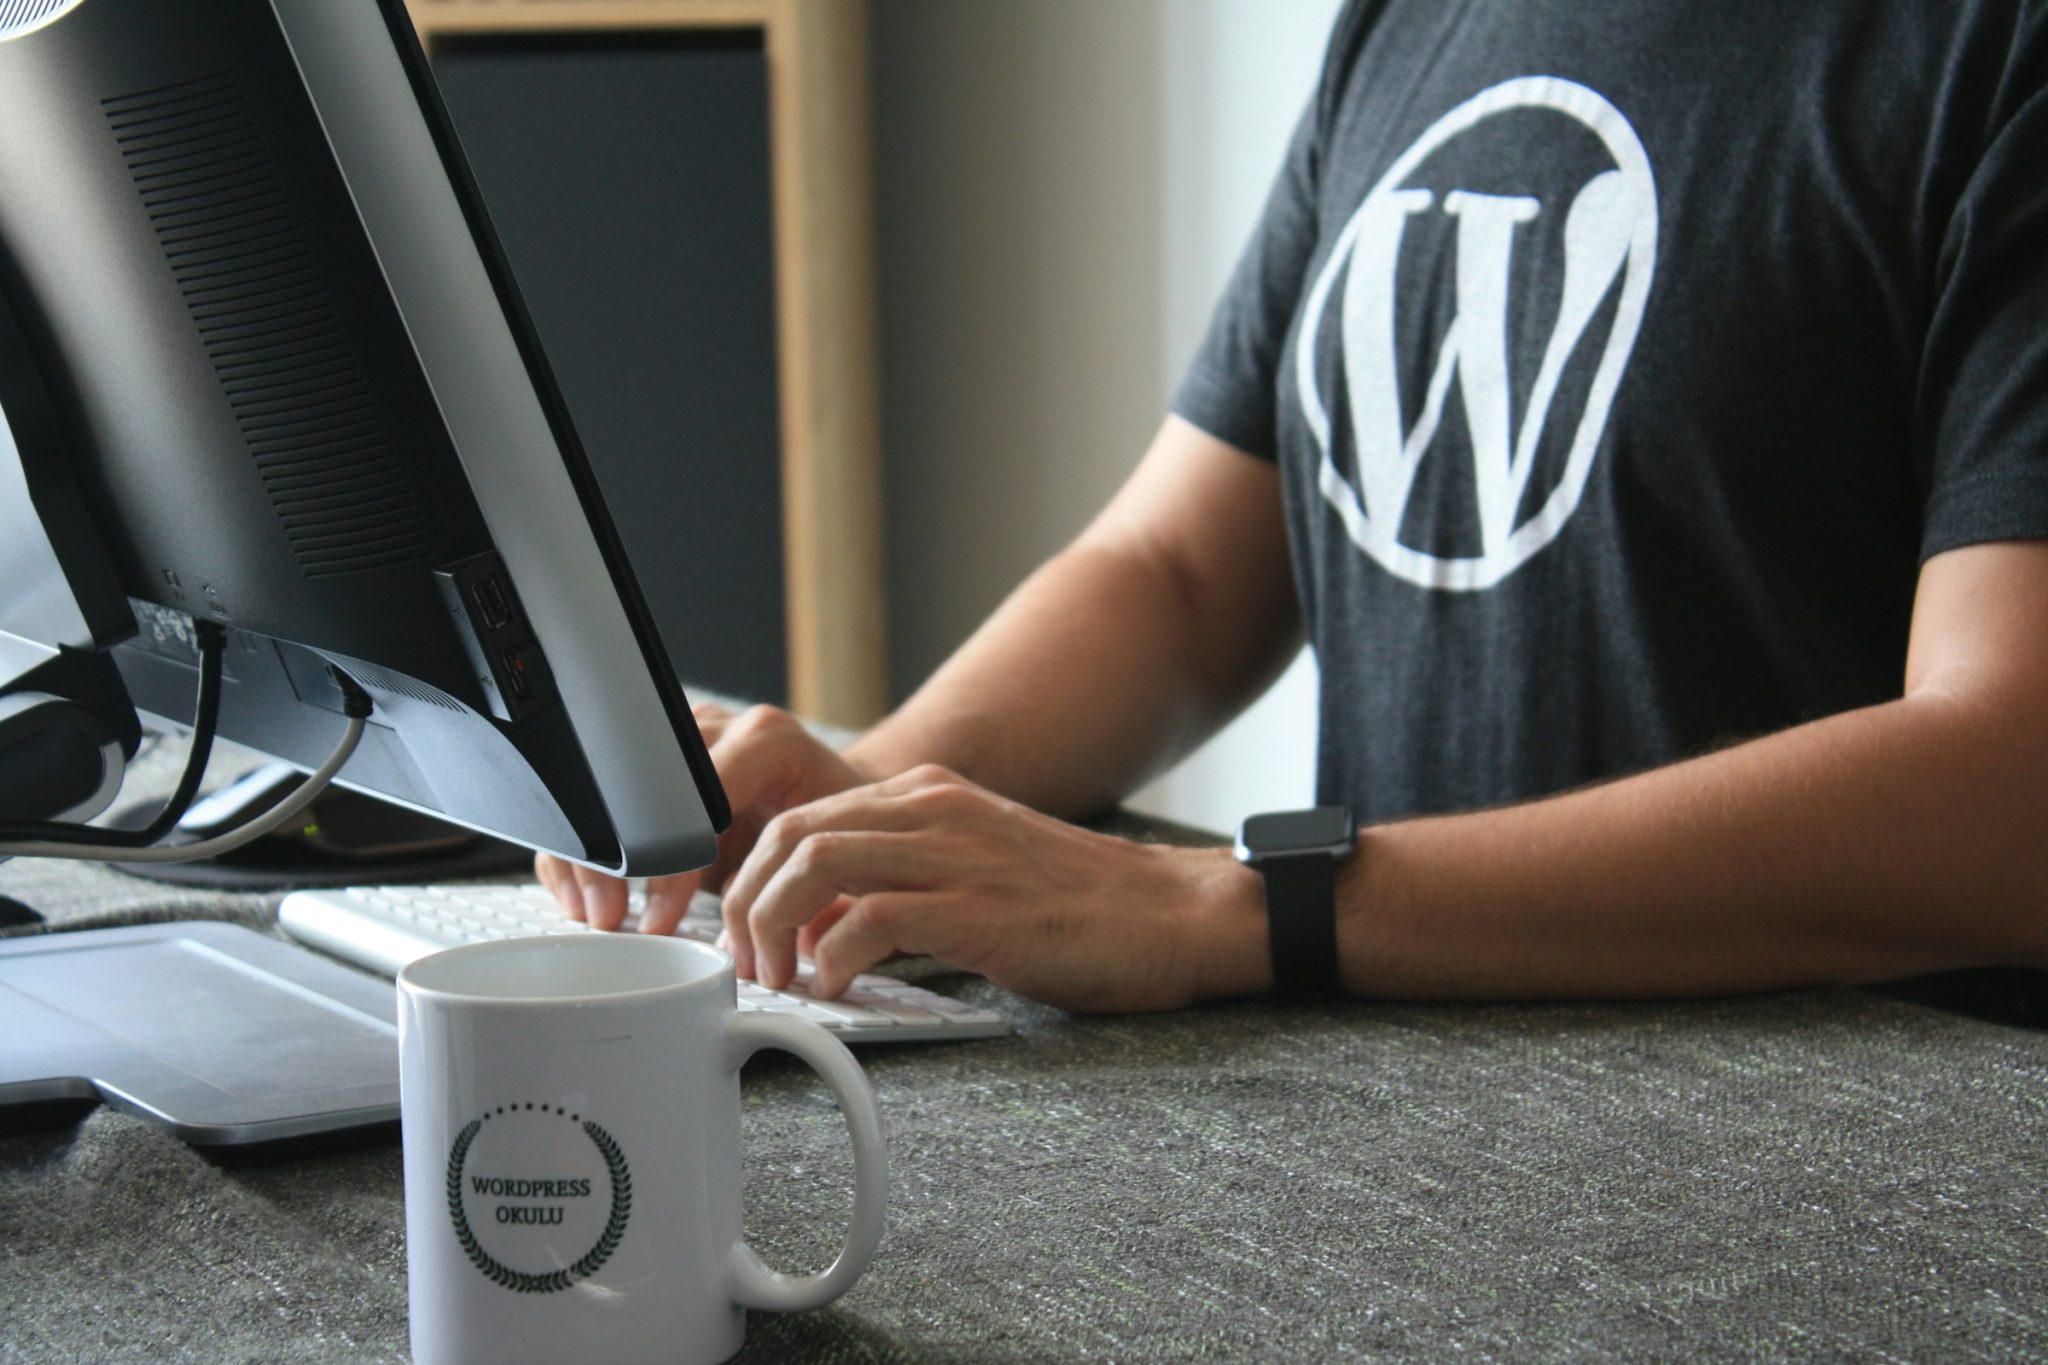 Why wordpress is the top choice for website creation